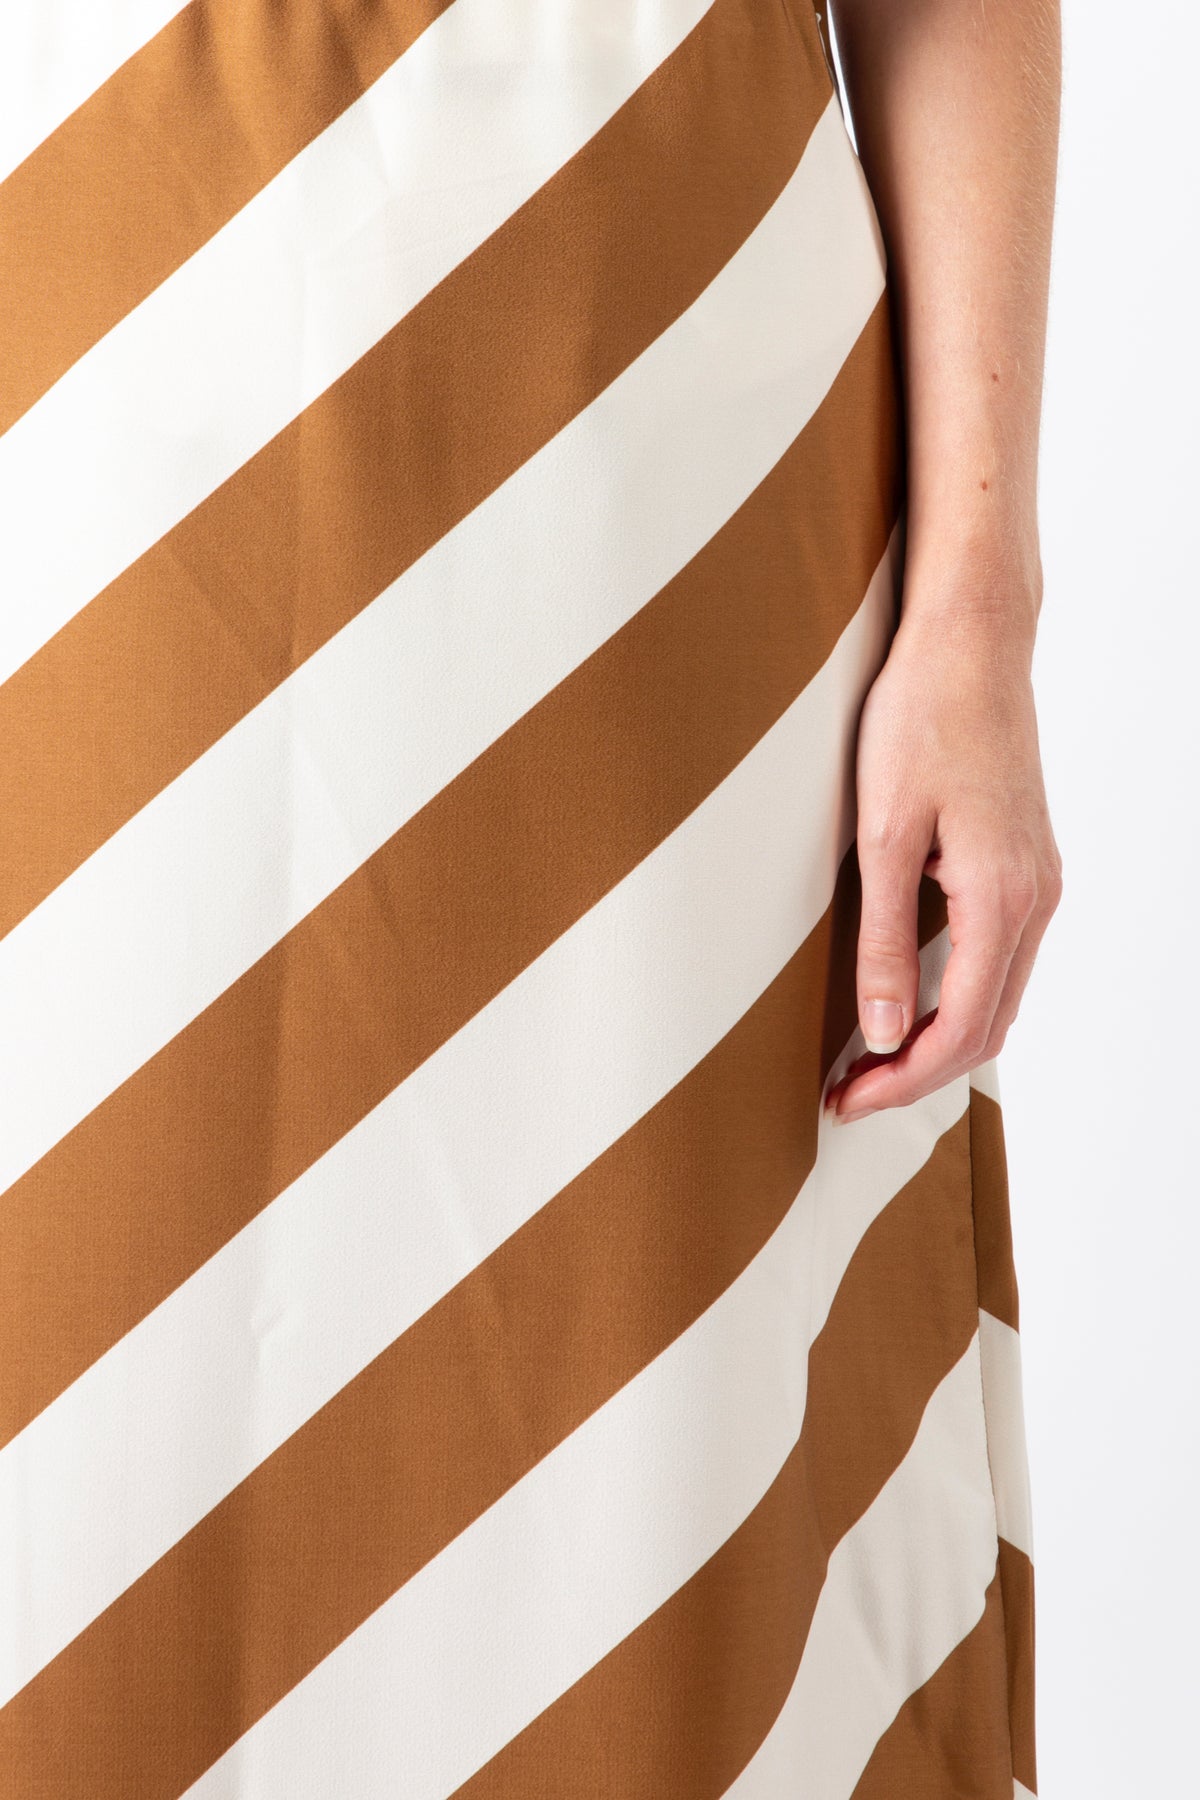 Erin Skirt Choc Stripe - PREORDER DELIVERY EARLY JUNE